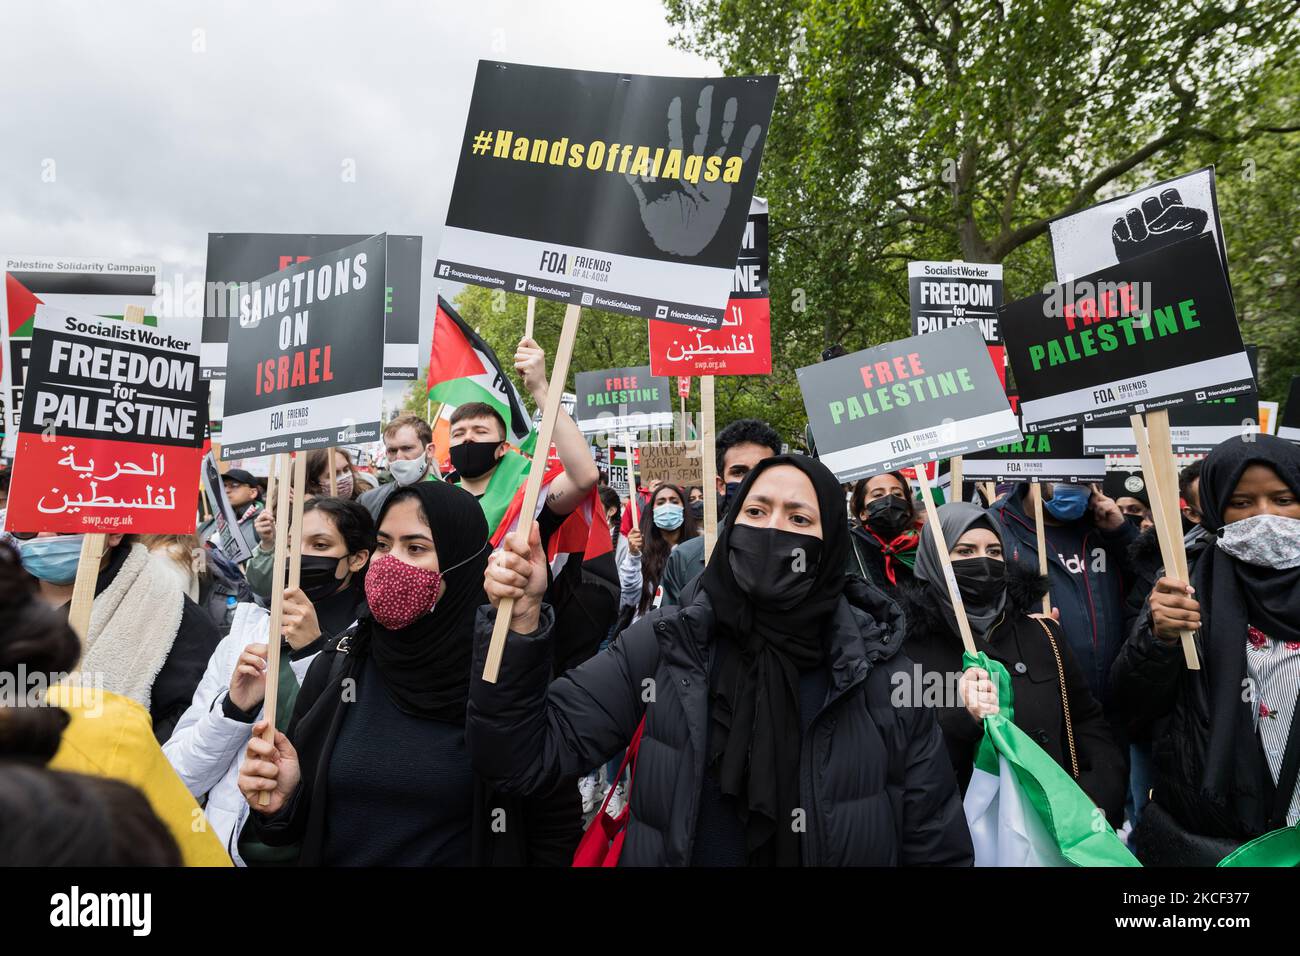 LONDON, UNITED KINGDOM - MAY 22, 2021: Tens of thousands of protesters gather in central London for a demonstration in support of Palestine, on 22 May, 2021 in London, England. A ceasefire between Israel and Palestine came into force on Friday following 11 days of air strikes that left more than 250 dead as conflict escalated over planned evictions of Palestinian families from their homes by Jewish settlers in the Sheikh Jarrah district of East Jerusalem and clashes with security forces around the Old City during Ramadan. (Photo by WIktor Szymanowicz/NurPhoto) Stock Photo